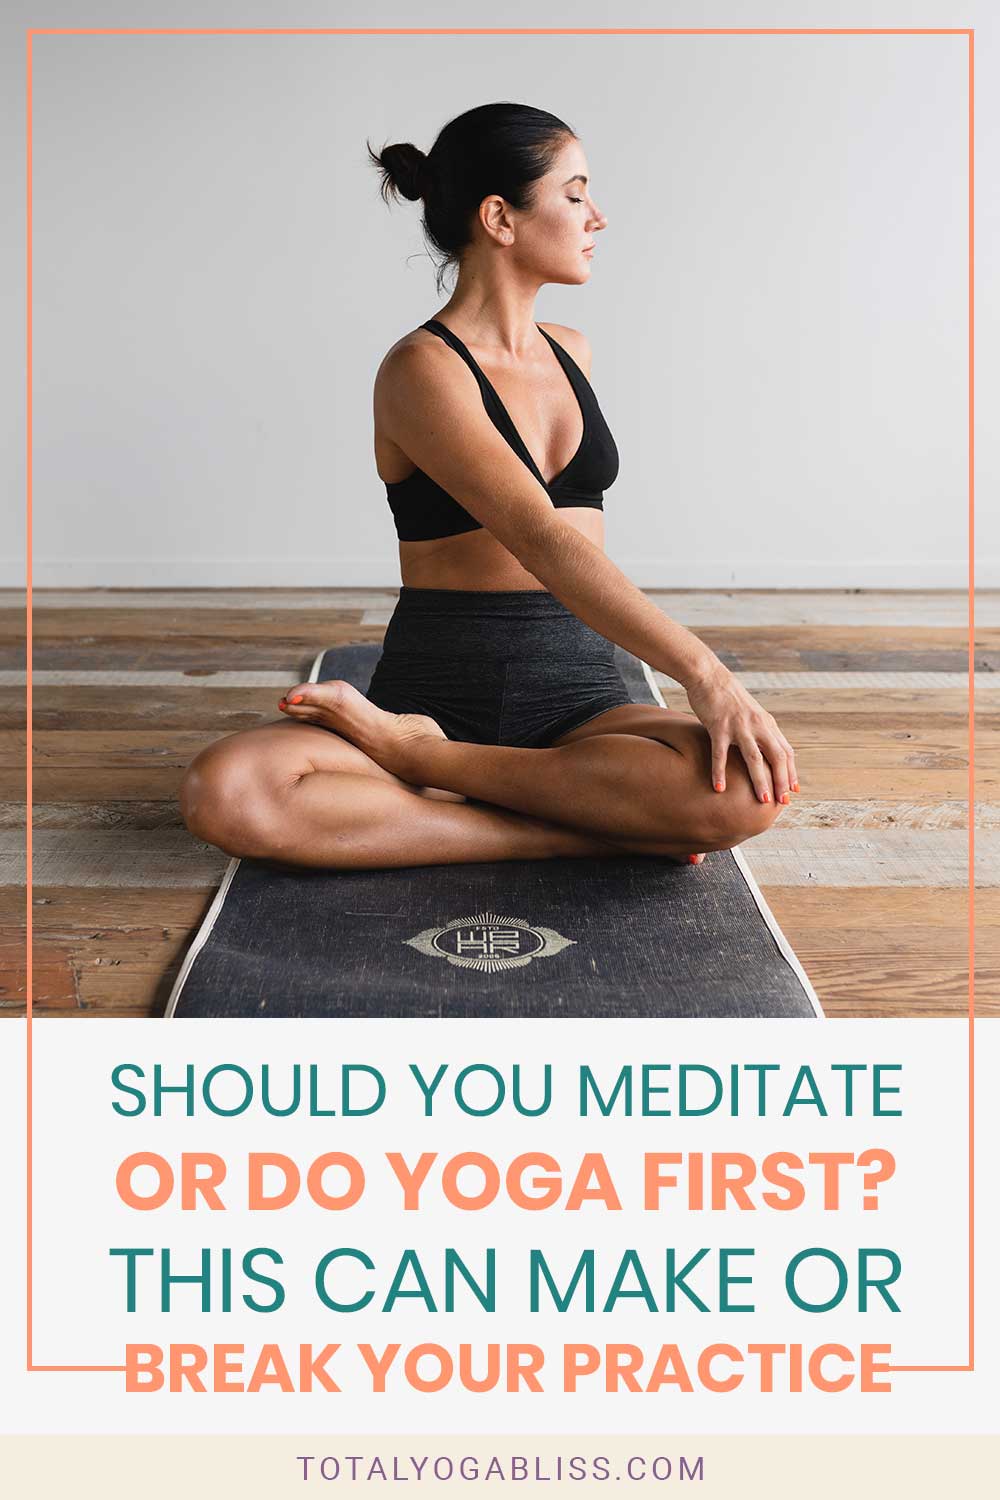 Should You Meditate Or Do Yoga First? This Can Make or Break Your Practice